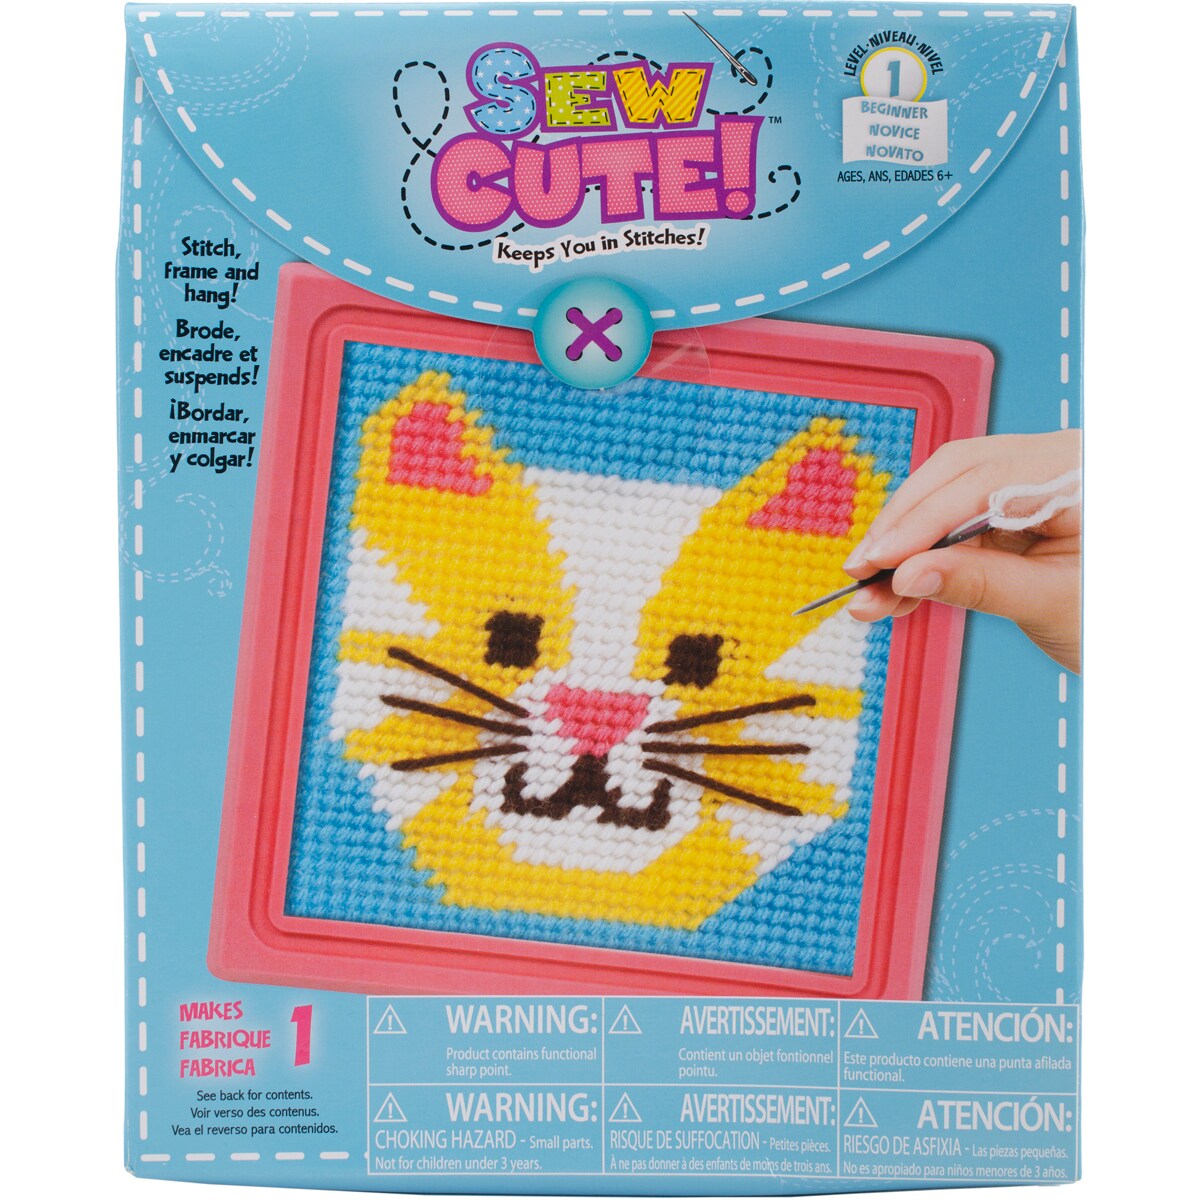 Colorbok Sew Cute! Needlepoint Kit-Cat